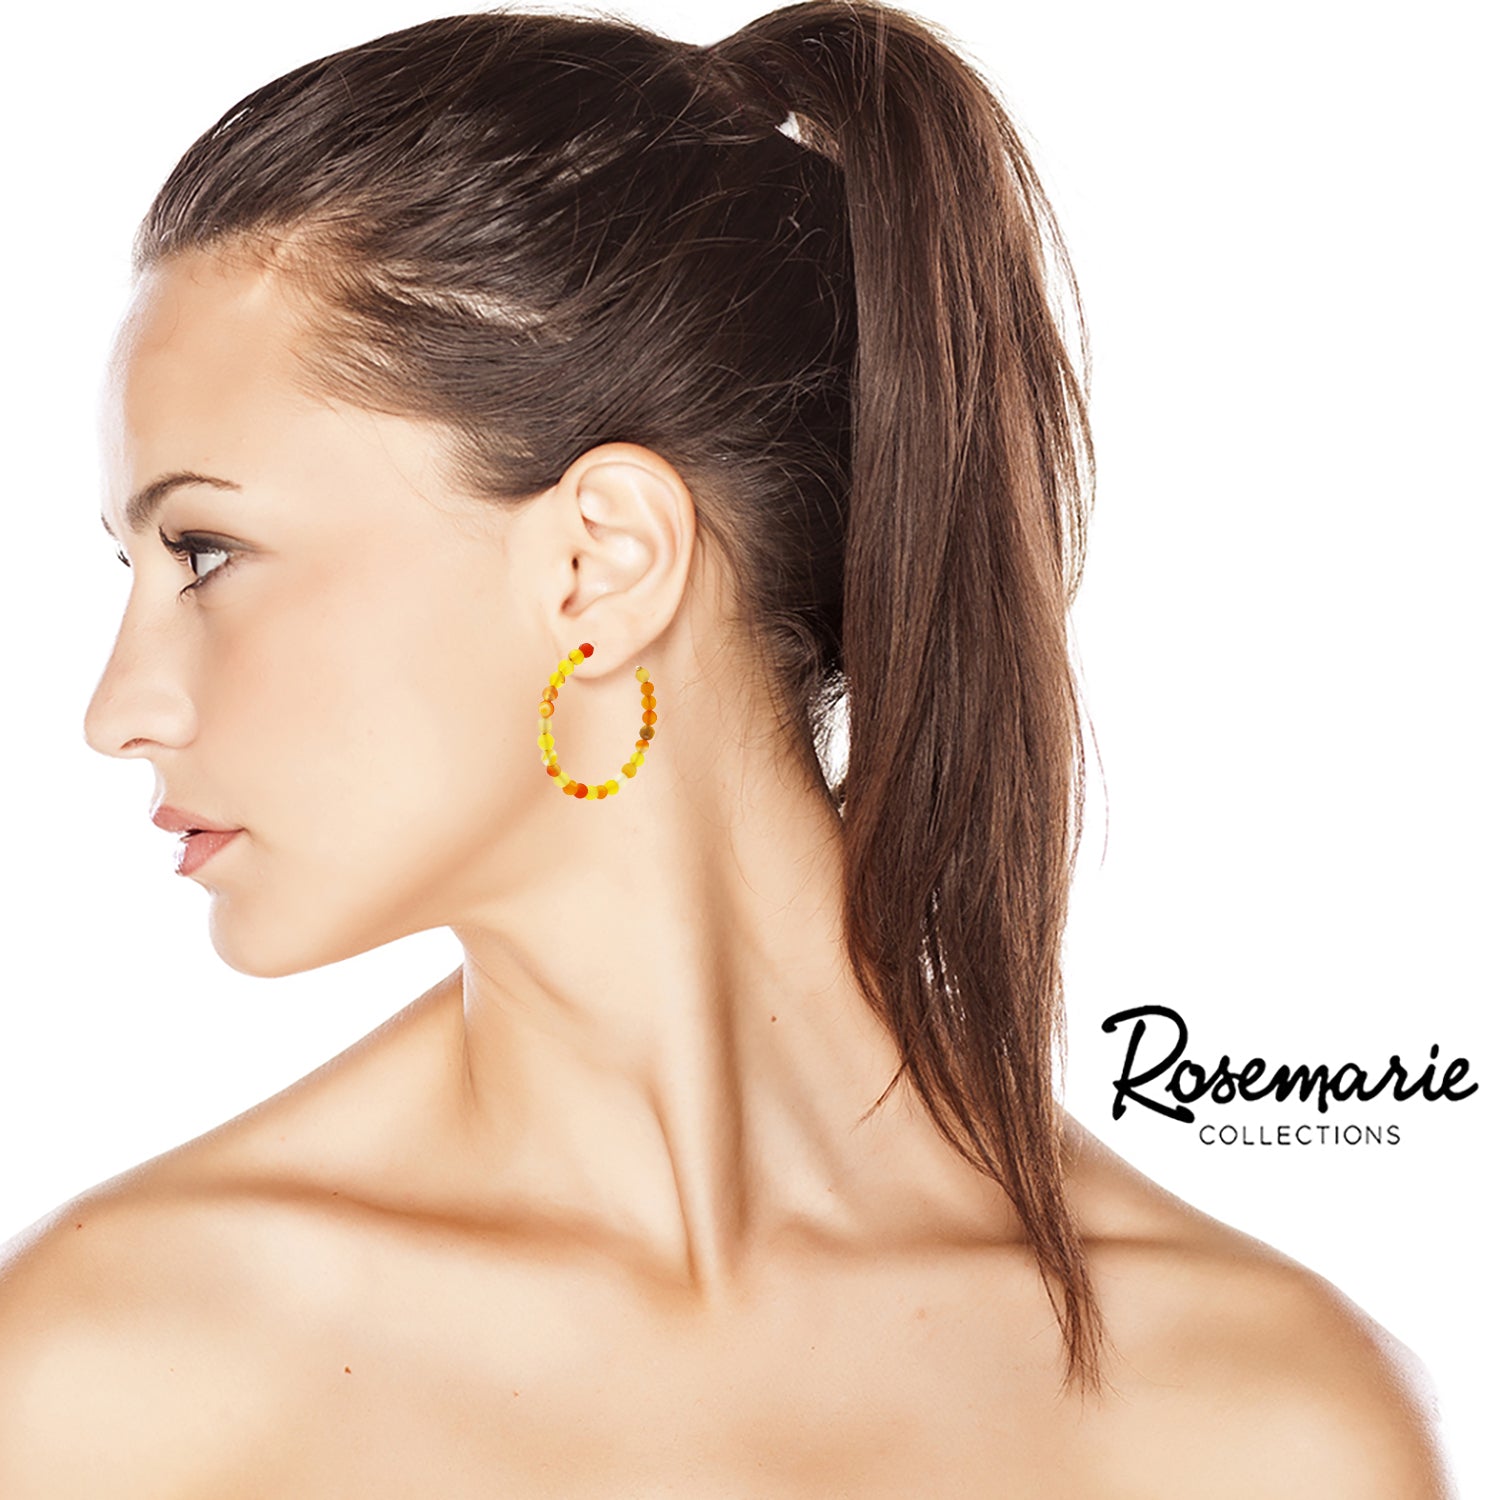 Colorful Natural Stone Bead Side Silhouette Hoops With Hypoallergenic Post Back Earrings, 45mm (Sunshine Yellow Topaz)